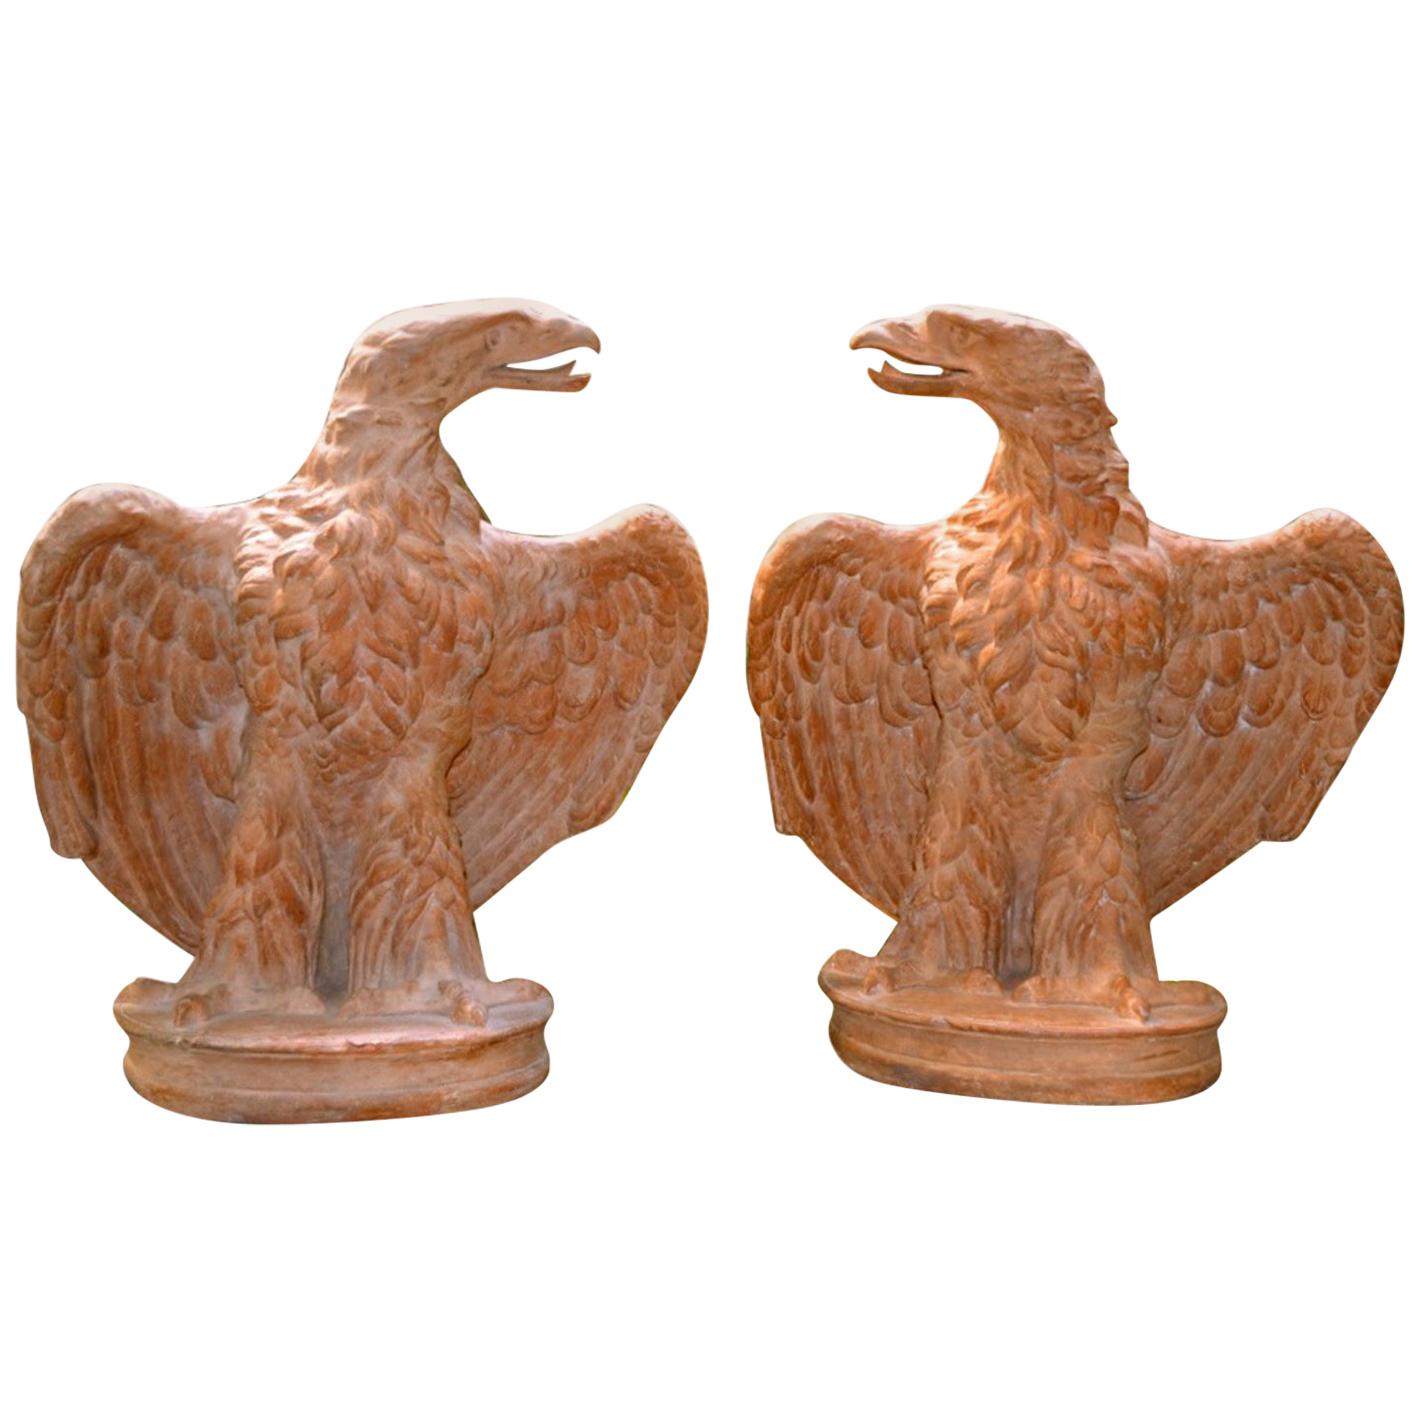 Pair of Italian Terracotta Eagles After a 1 st Century AD Roman Marble Original